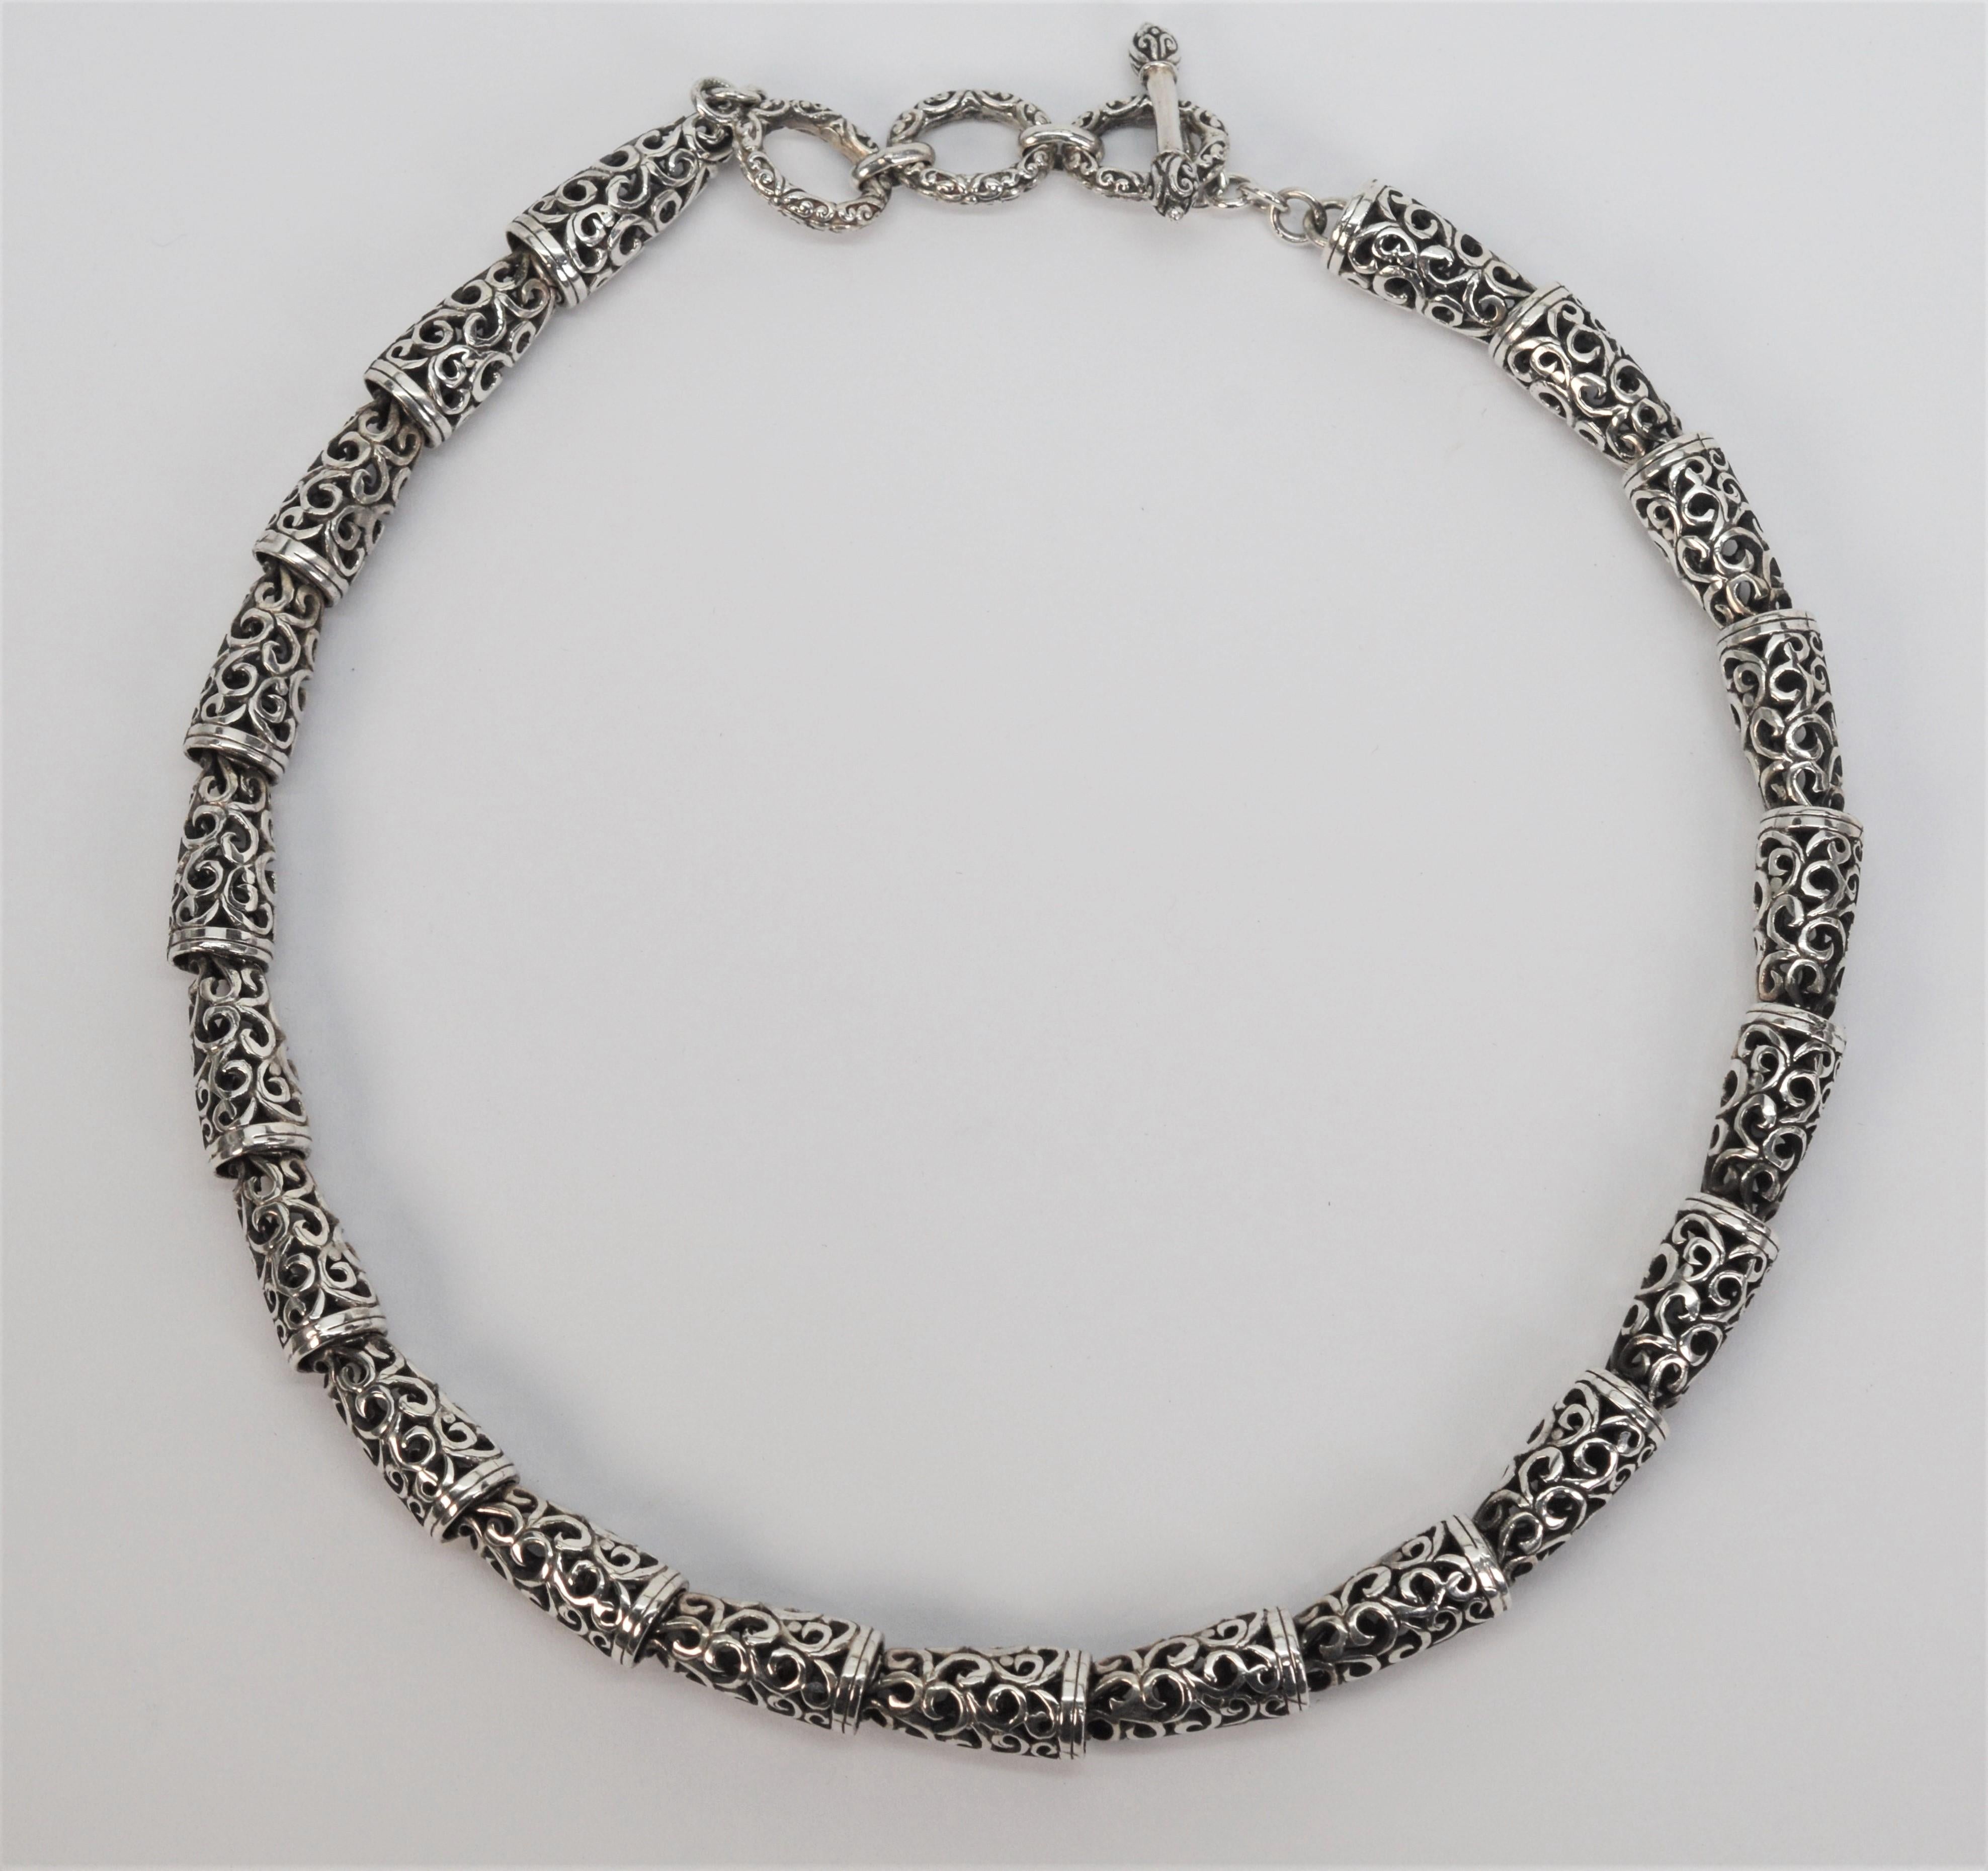 15-17 inch necklace